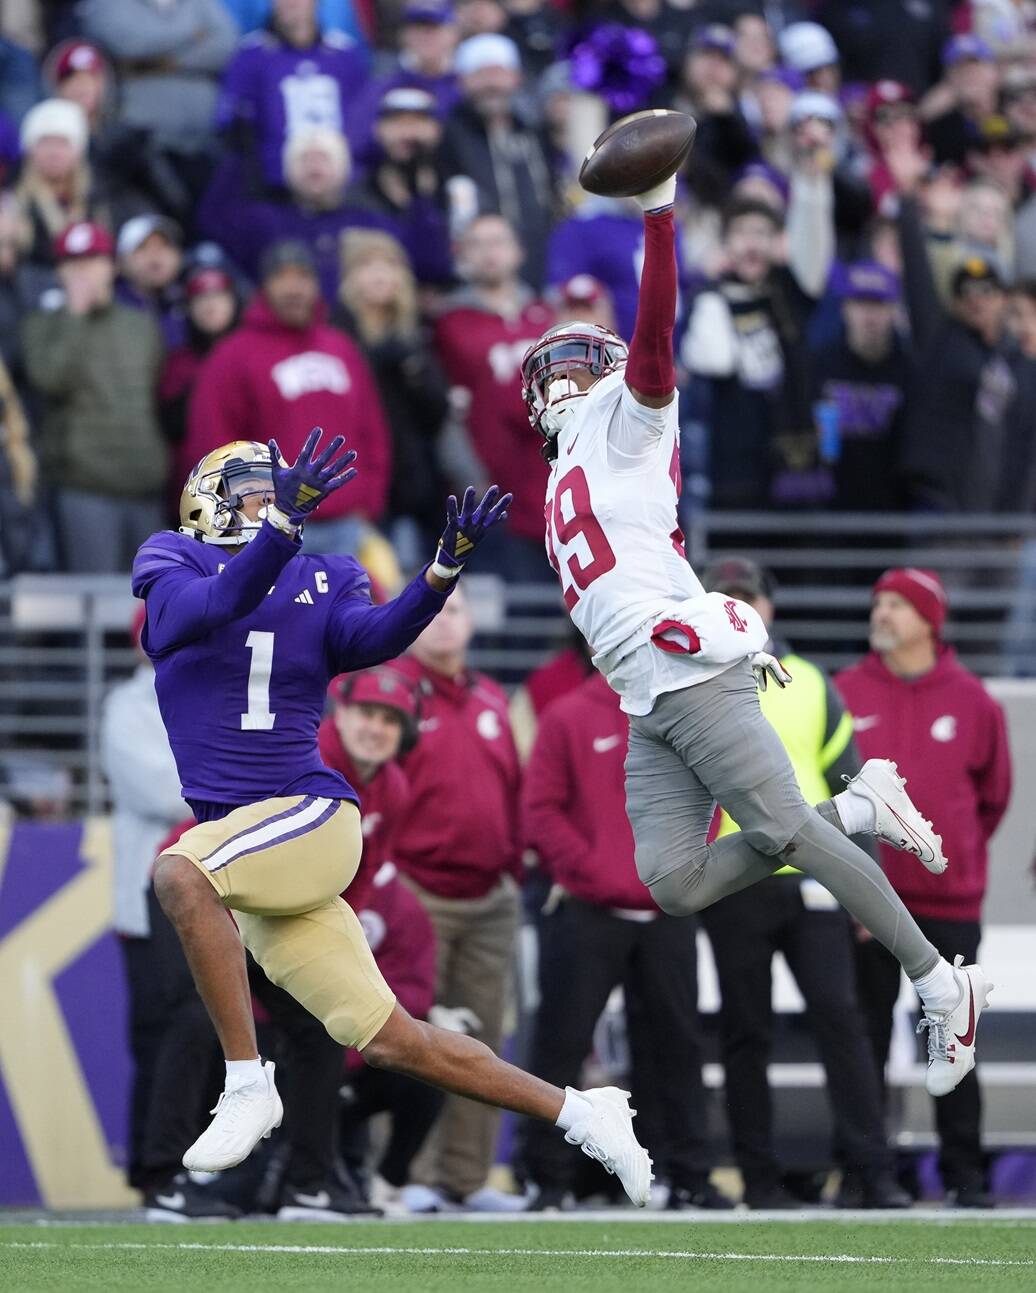 Washington State defensive back Jamorri Colson swats away a pass meant for Washington wide receiver Rome Odunze during the first half of an NCAA college football game, Saturday in Seattle. (AP Photo/Lindsey Wasson)